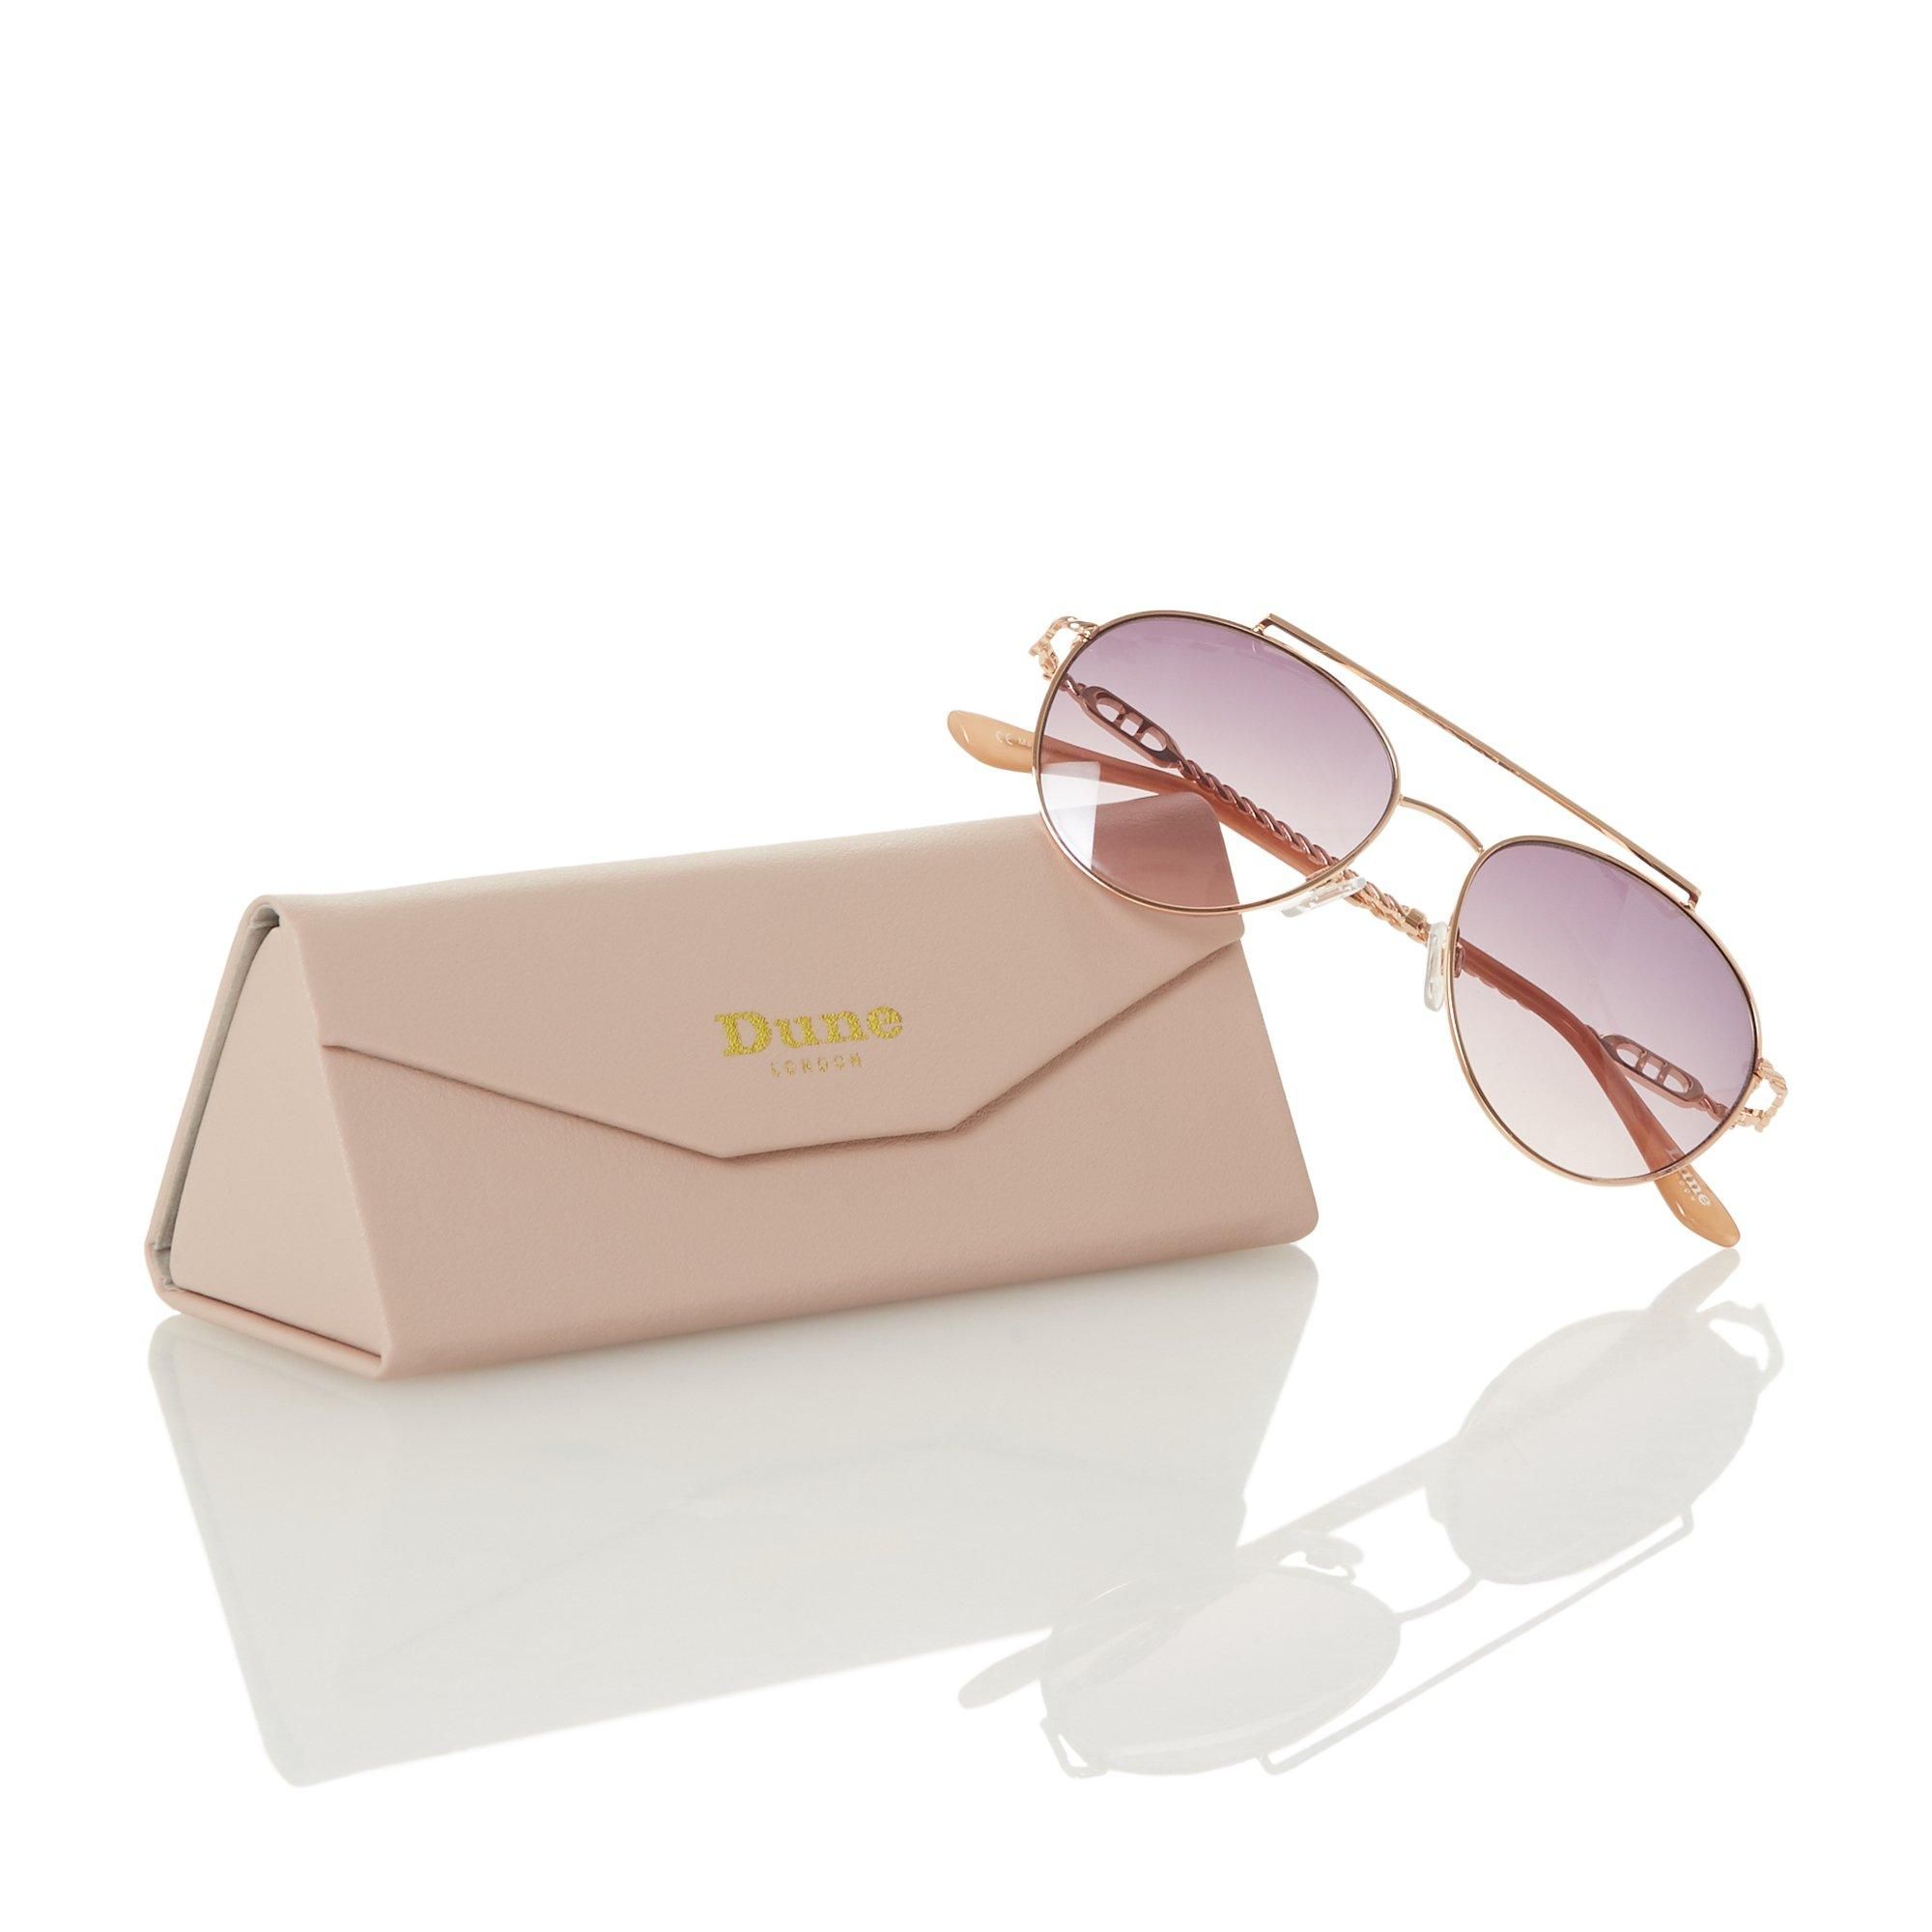 Update your look with a pair of the Geneva square-frame sunglasses. Fashioned with a smooth acetate base and contrasting lilac lenses. Translucent temples and gold-toned hardware lends a distinguished appeal.